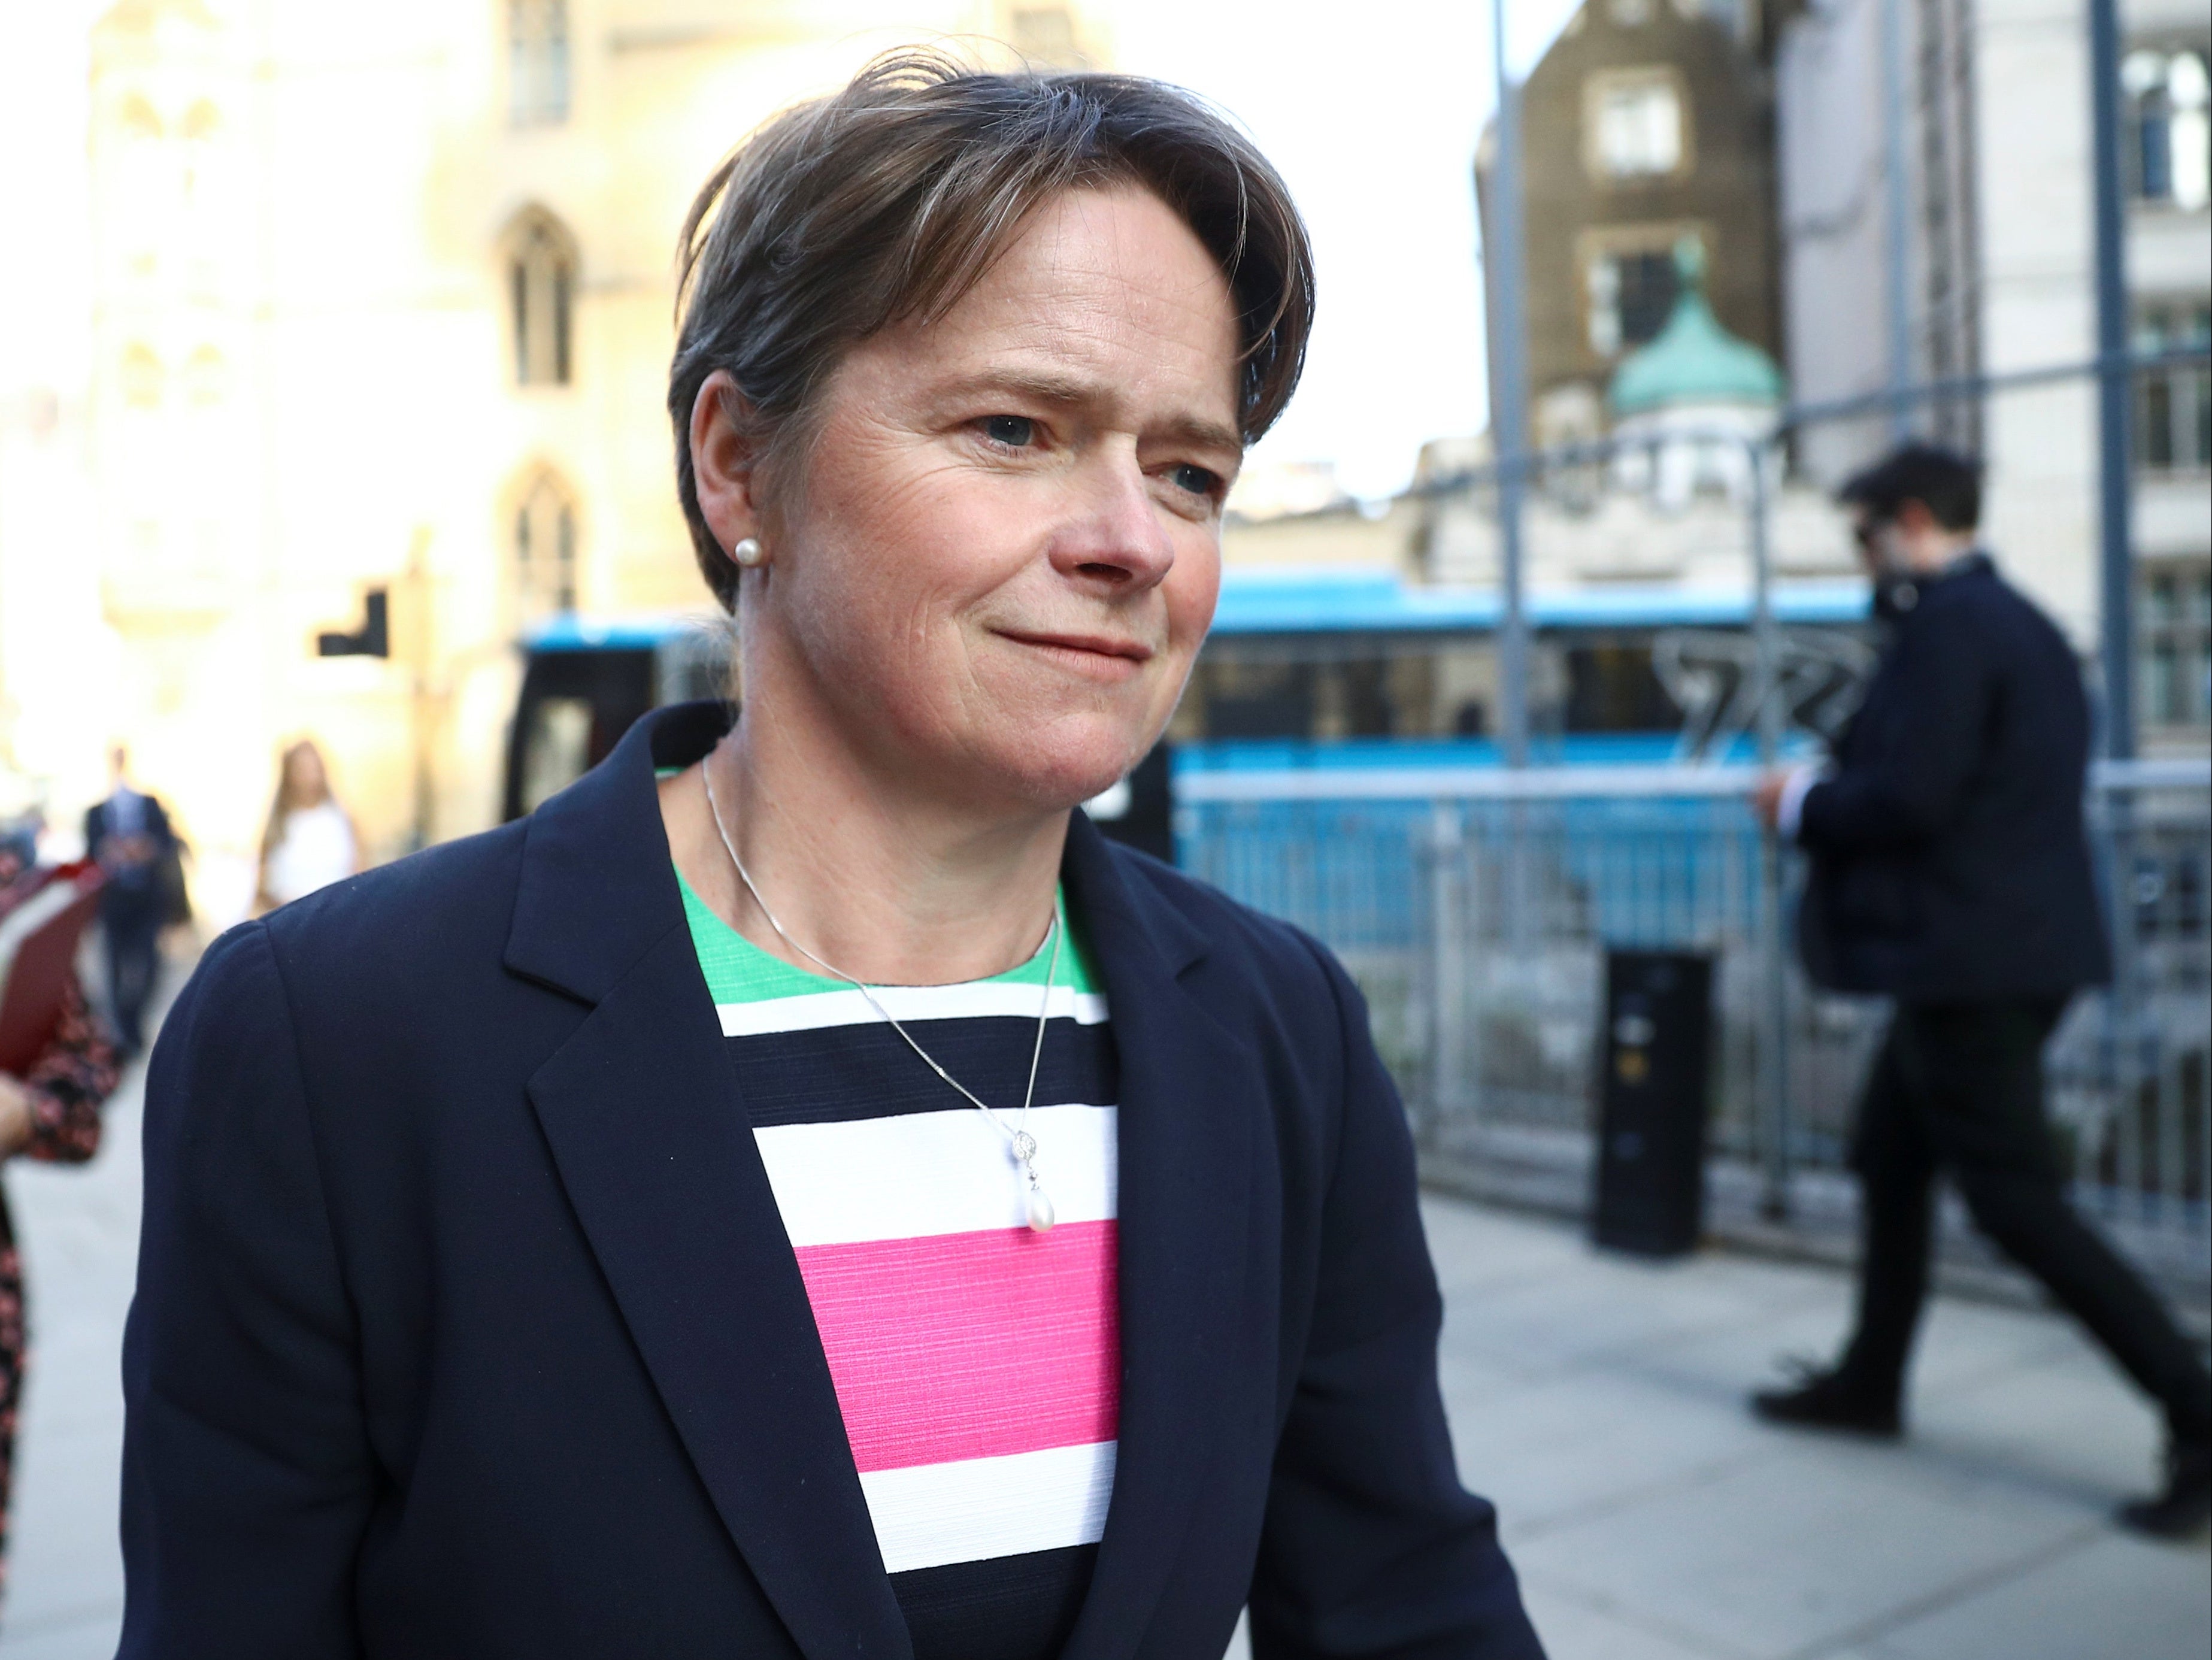 The appointment of Dido Harding, a Conservative peer, to run the test and trace system and also the forthcoming successor to Public Health England, has been labelled as cronyism